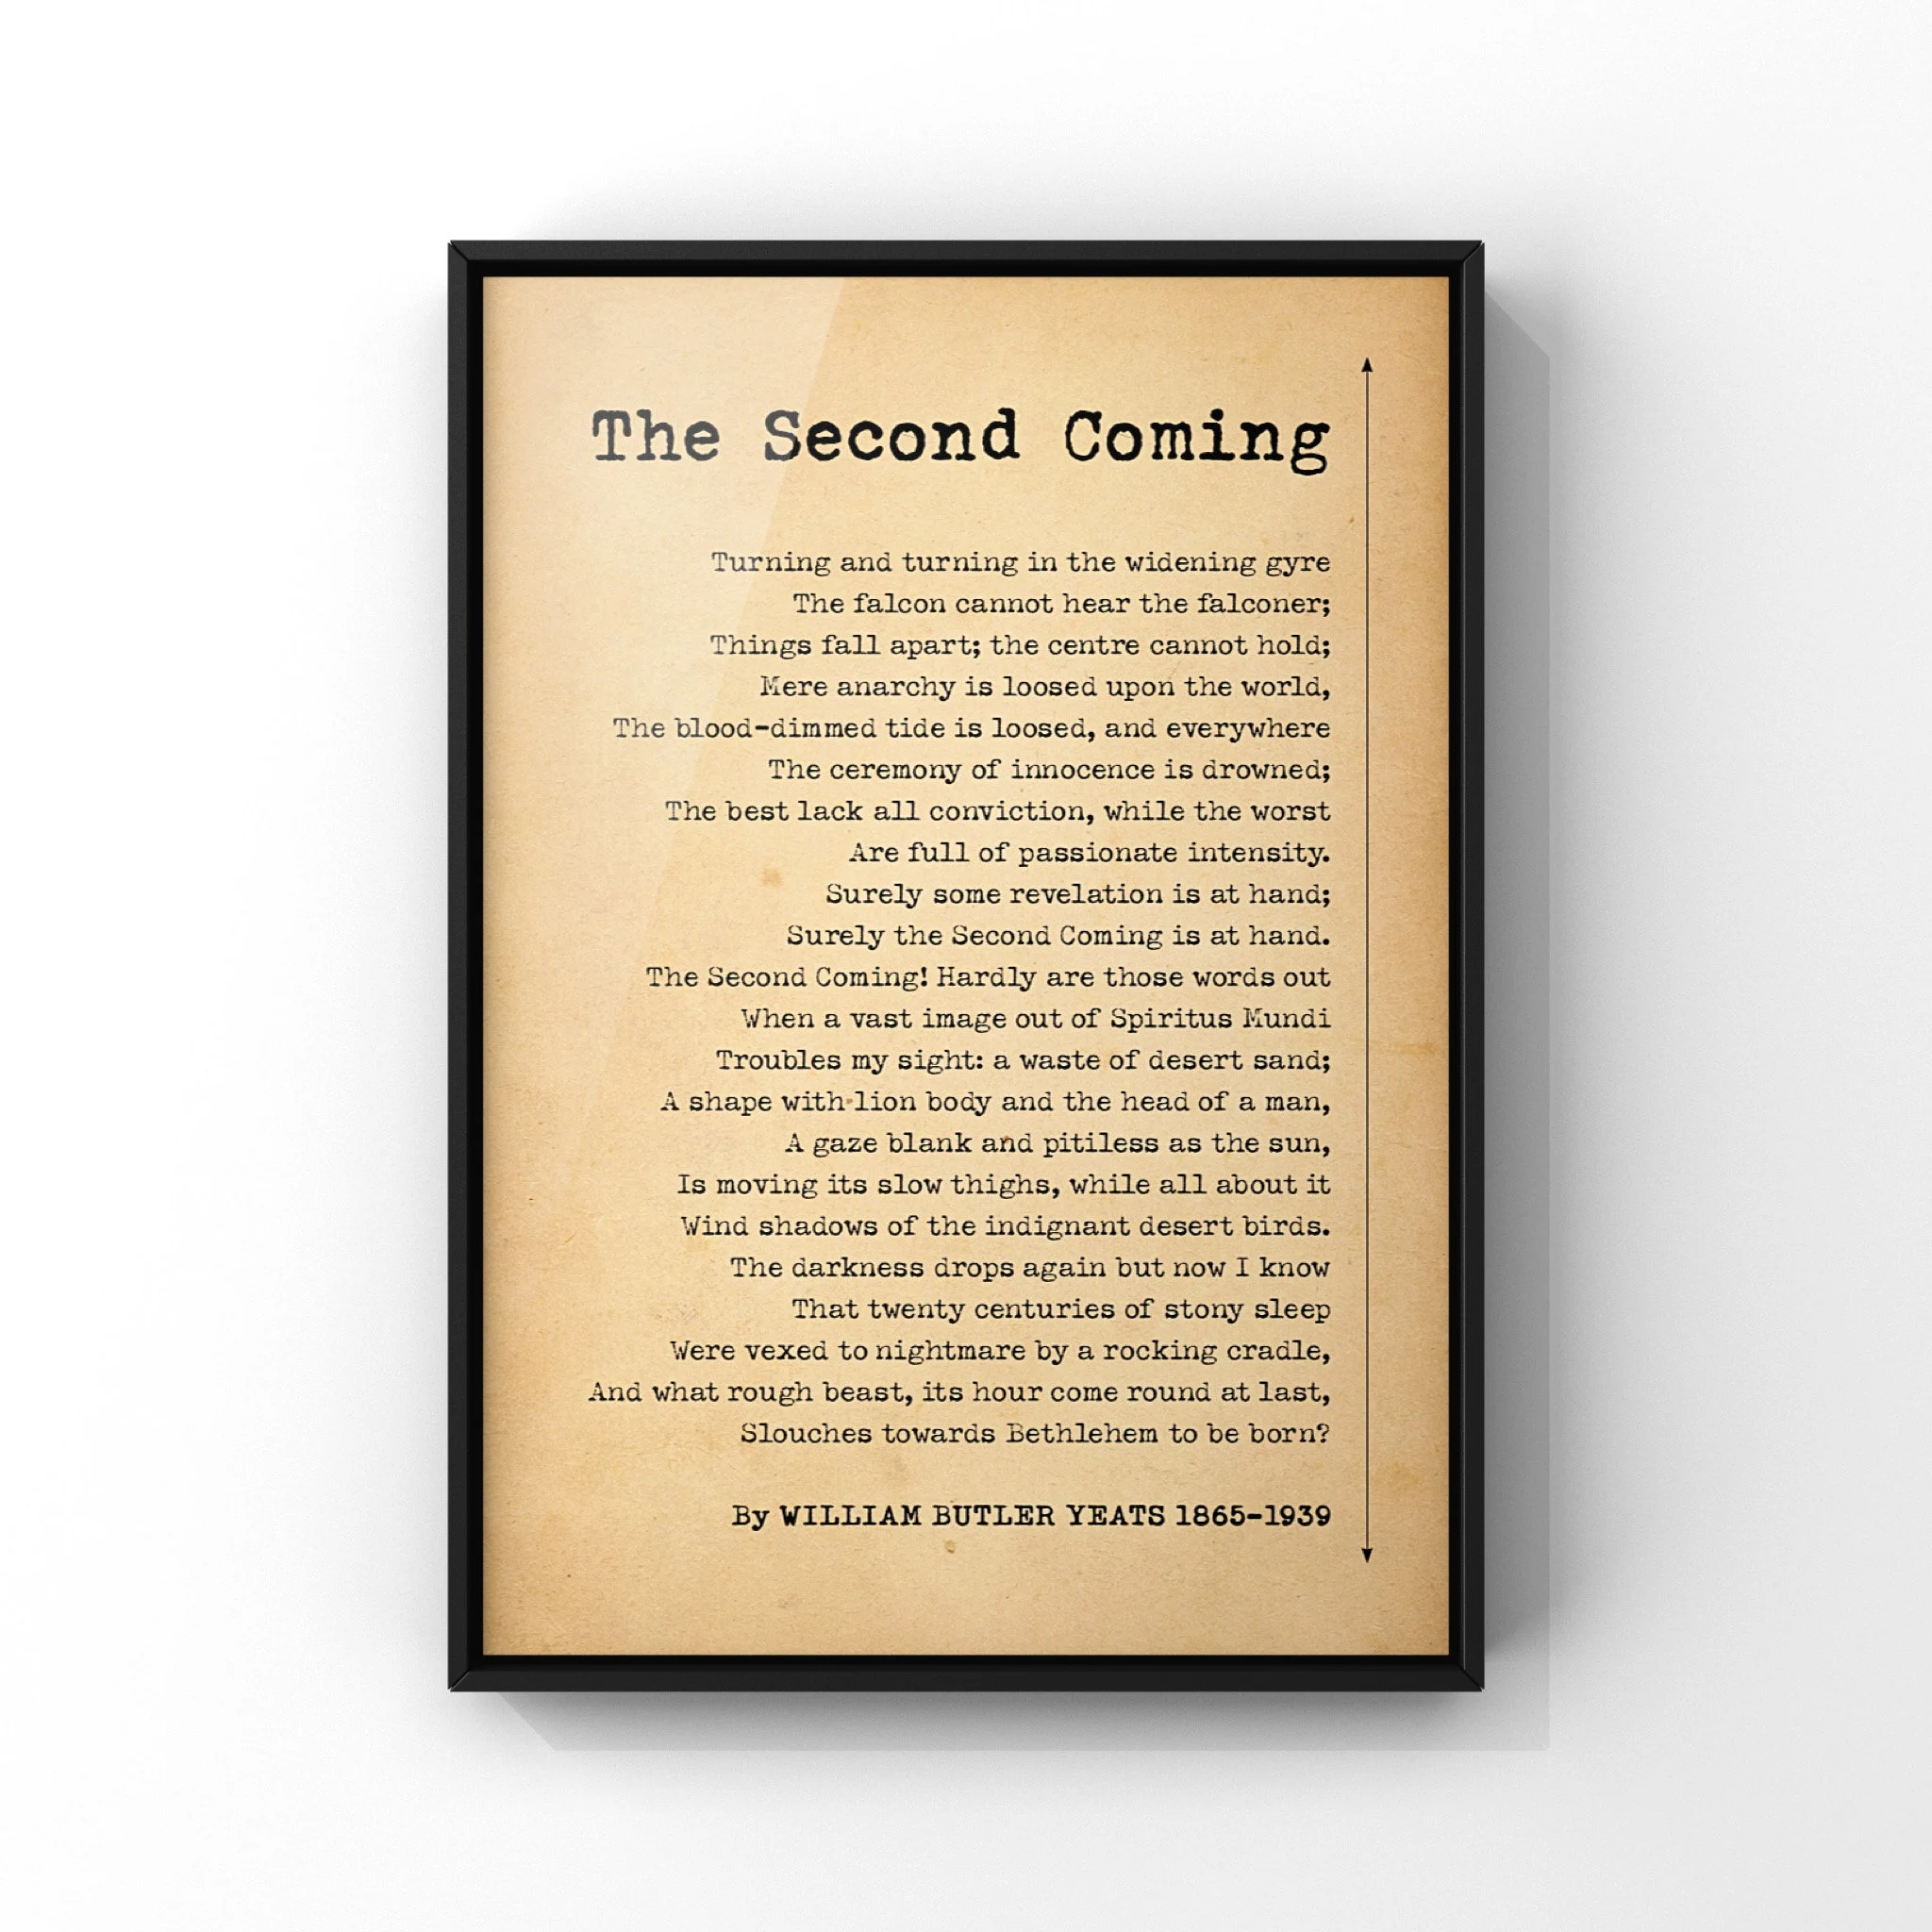 The Second Coming Poem by William Butler 1865-1939